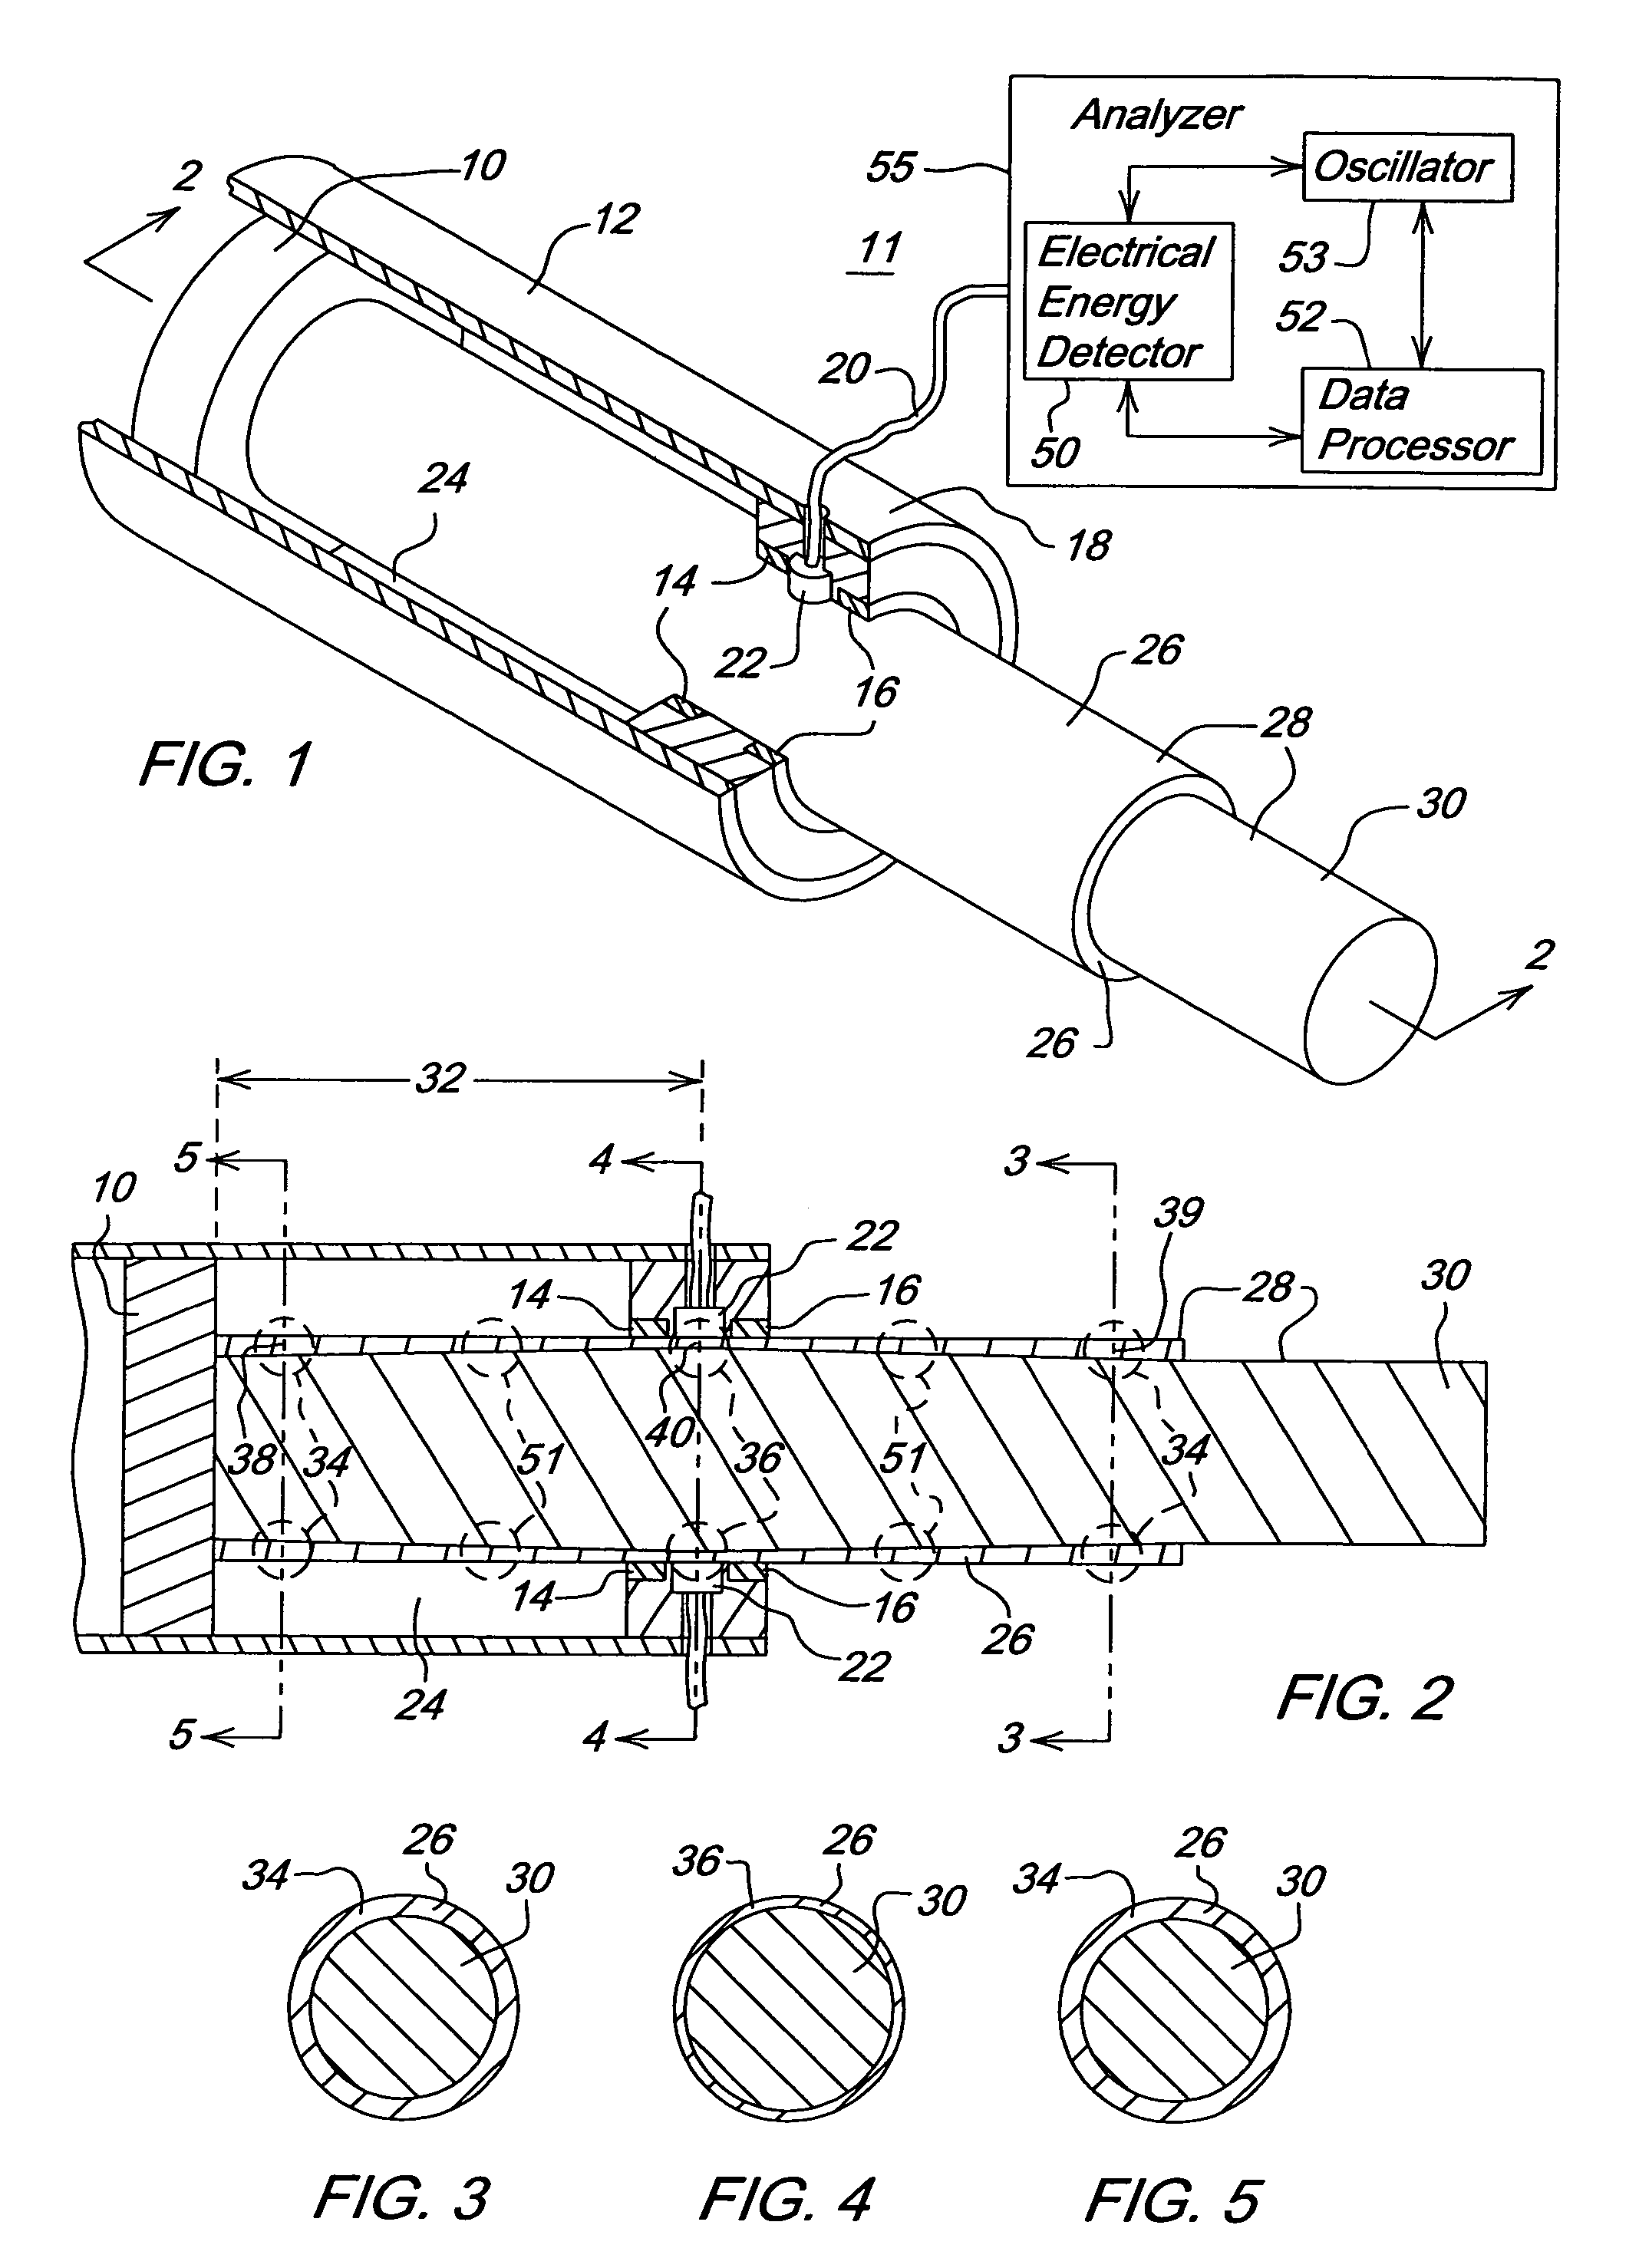 System and method for detecting the axial position of a shaft or a member attached thereto